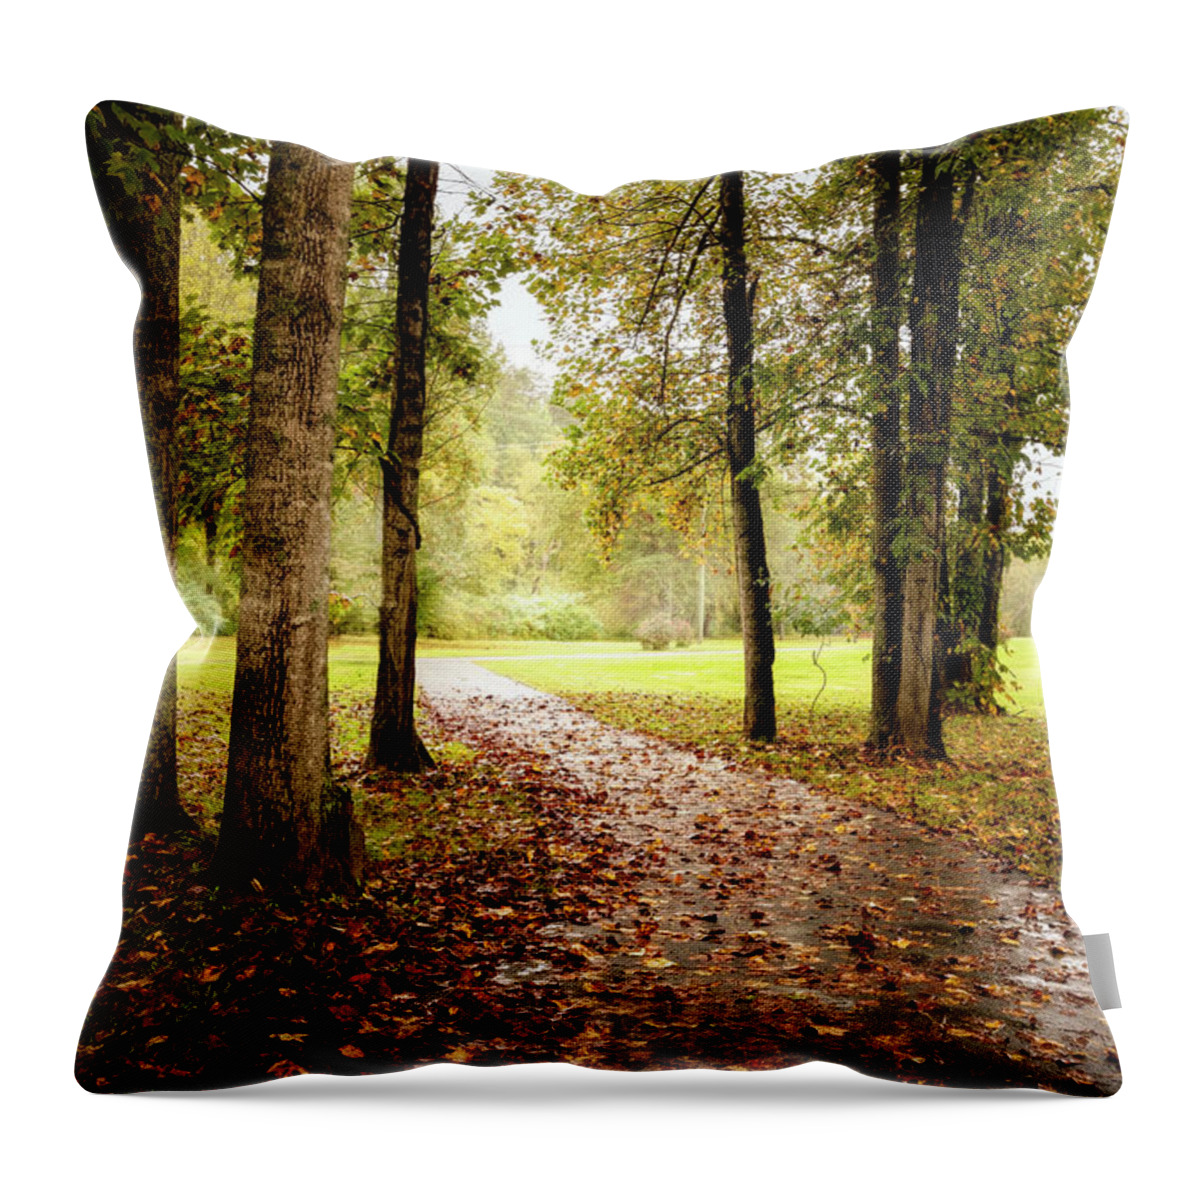 Trail Throw Pillow featuring the photograph Rainy Morning Walk by Debra and Dave Vanderlaan